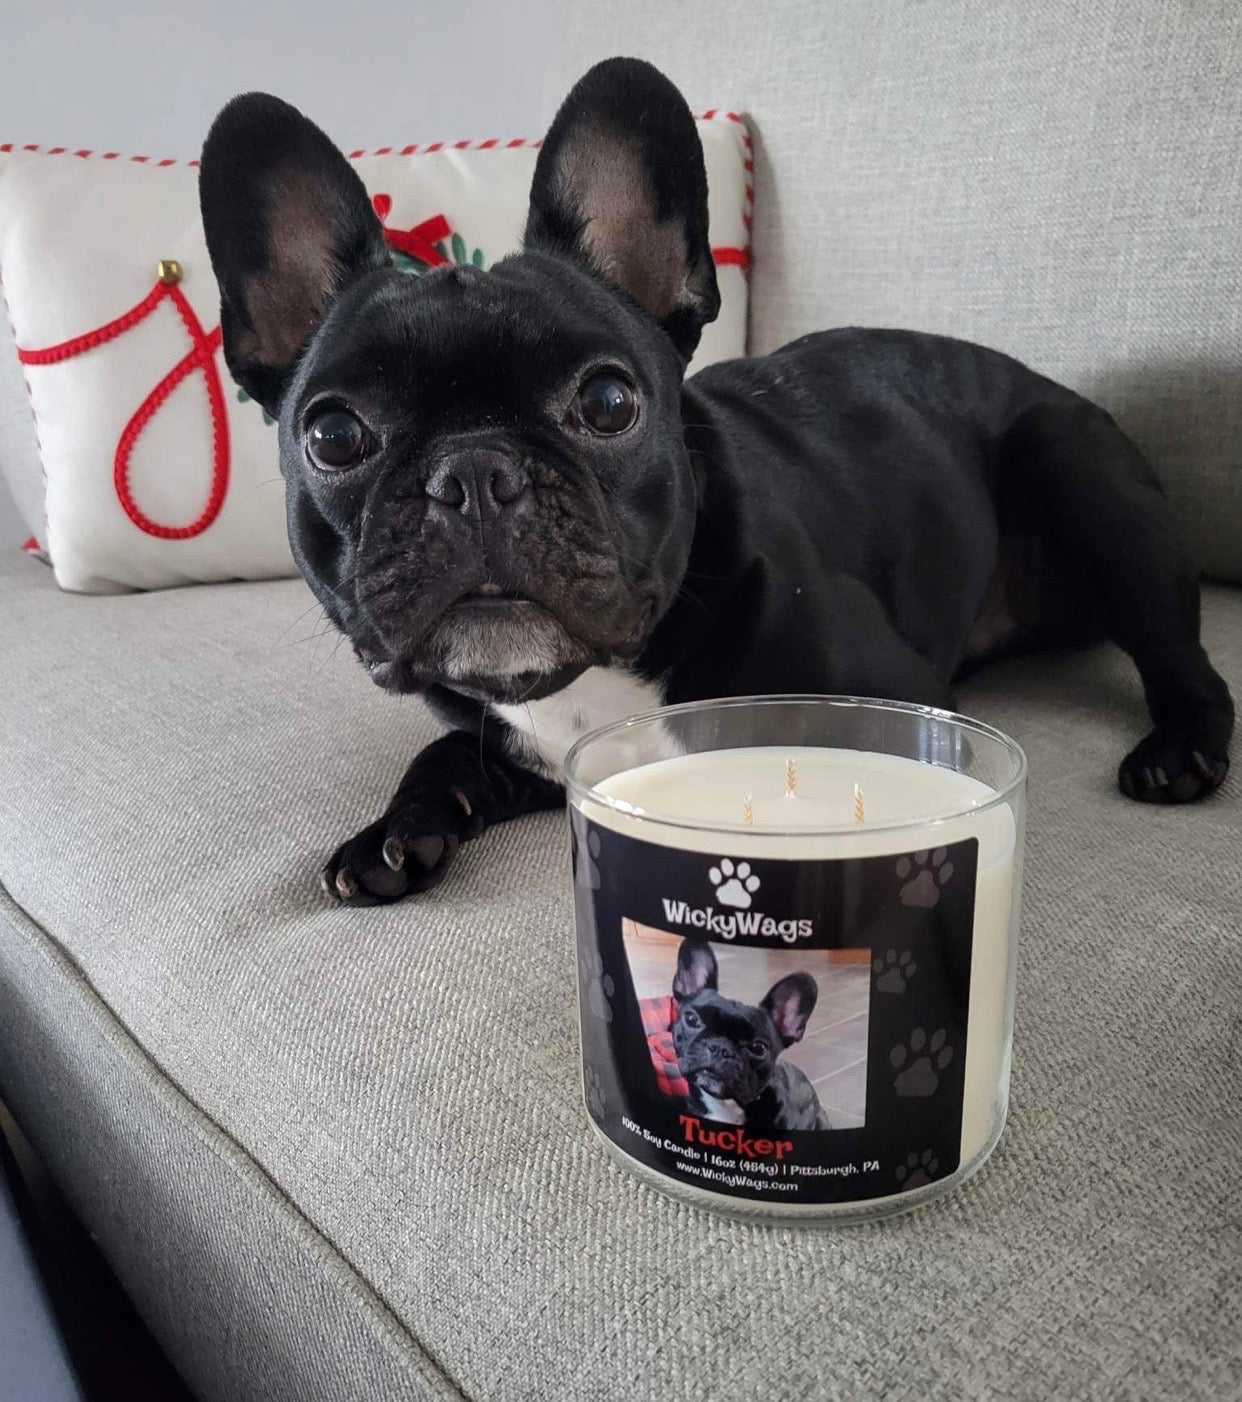 Tucker next to his customer 3-wick candle created by WickyWags Candles.